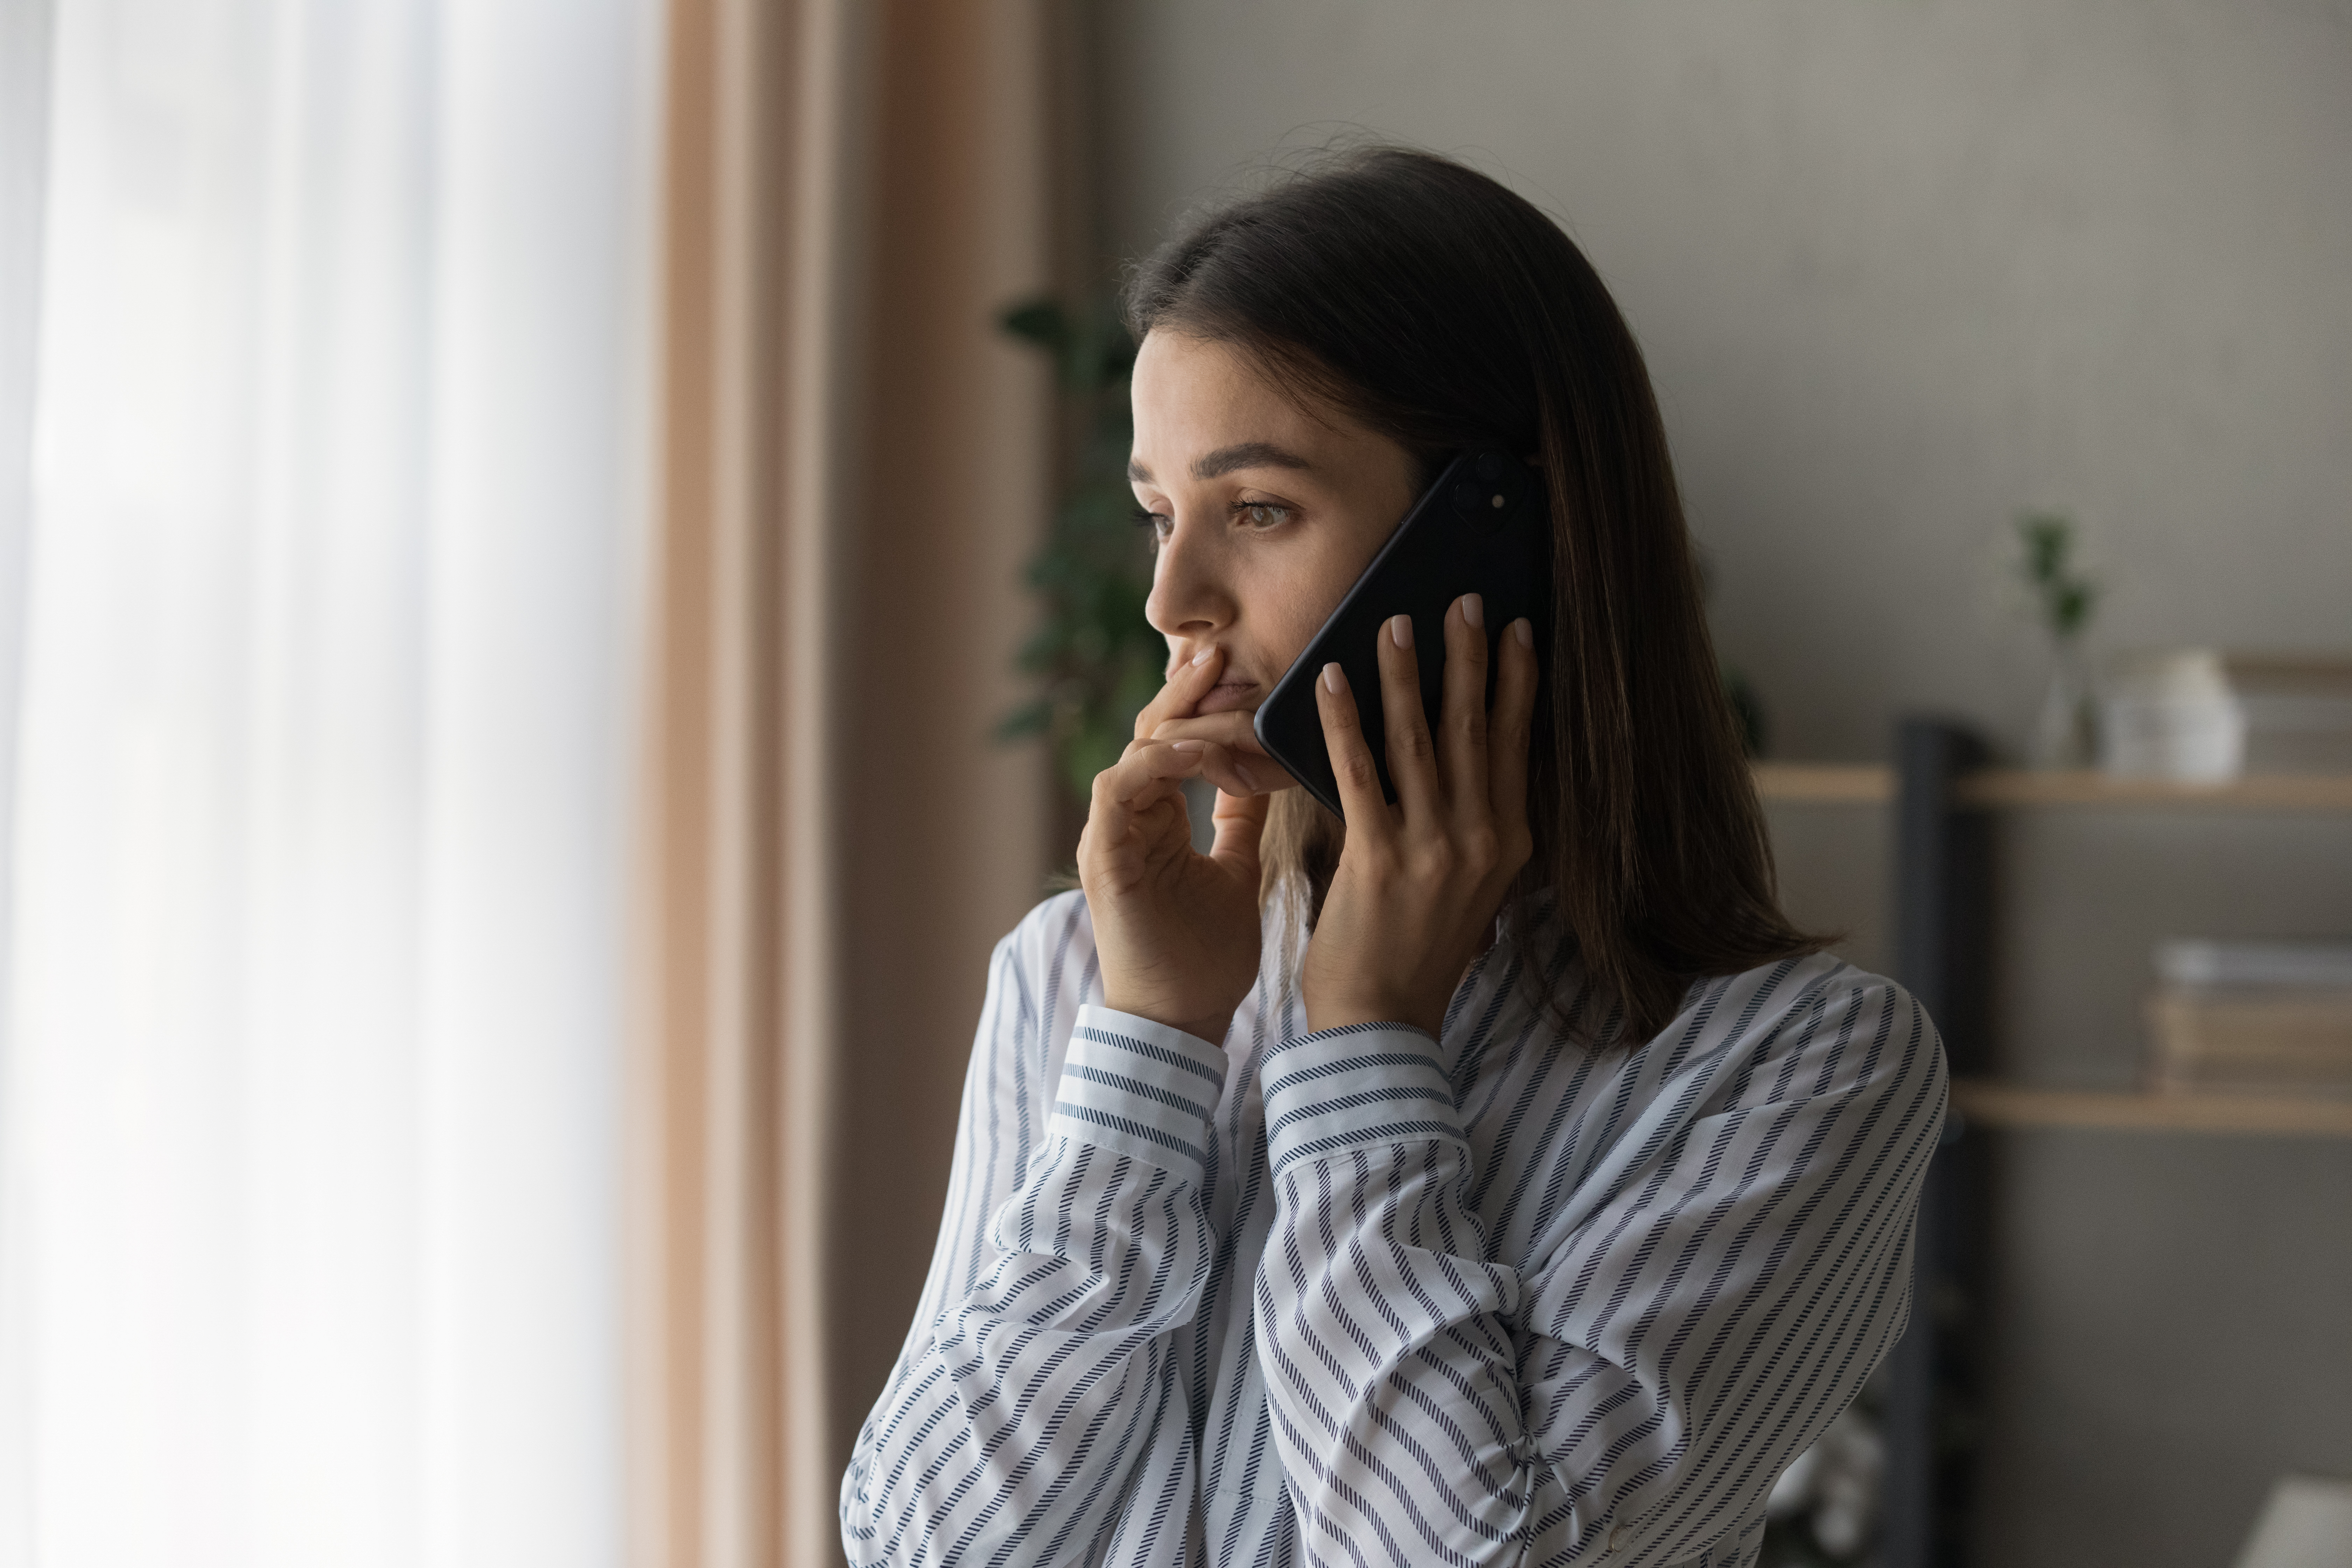 A young woman on the phone | Source: Shutterstock